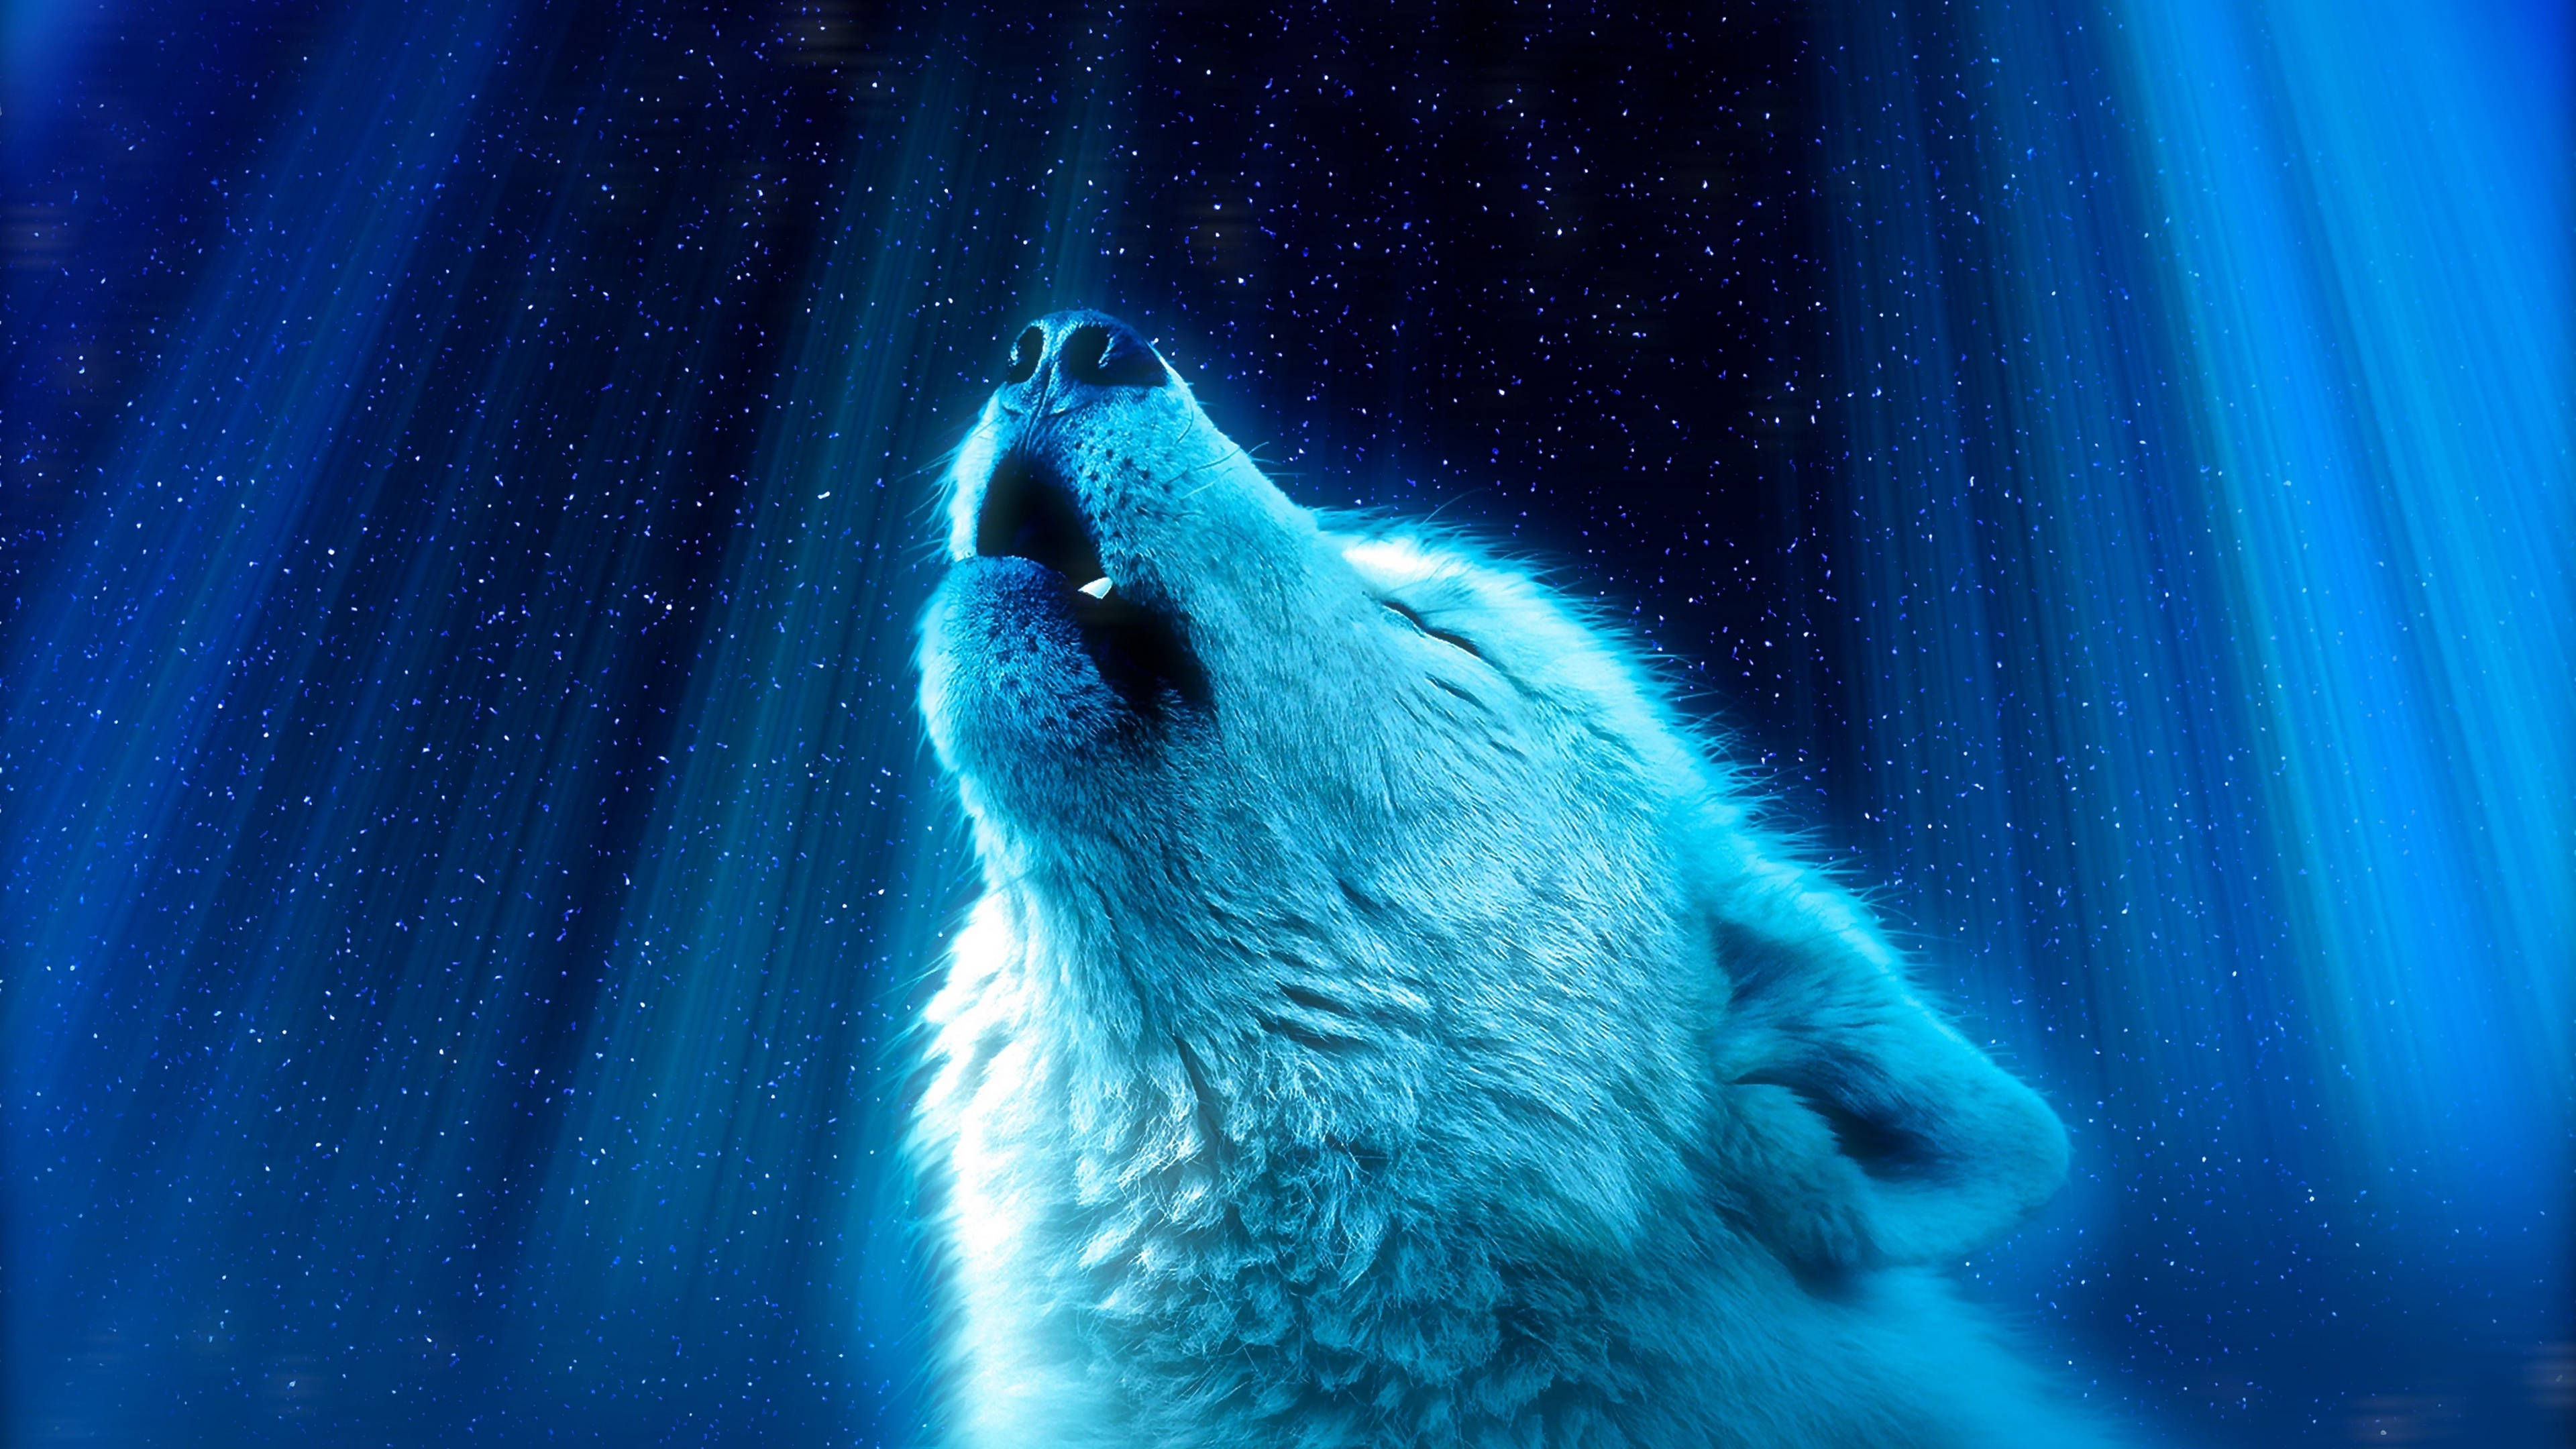 Cool Starry Galaxy Night Howling Wolf